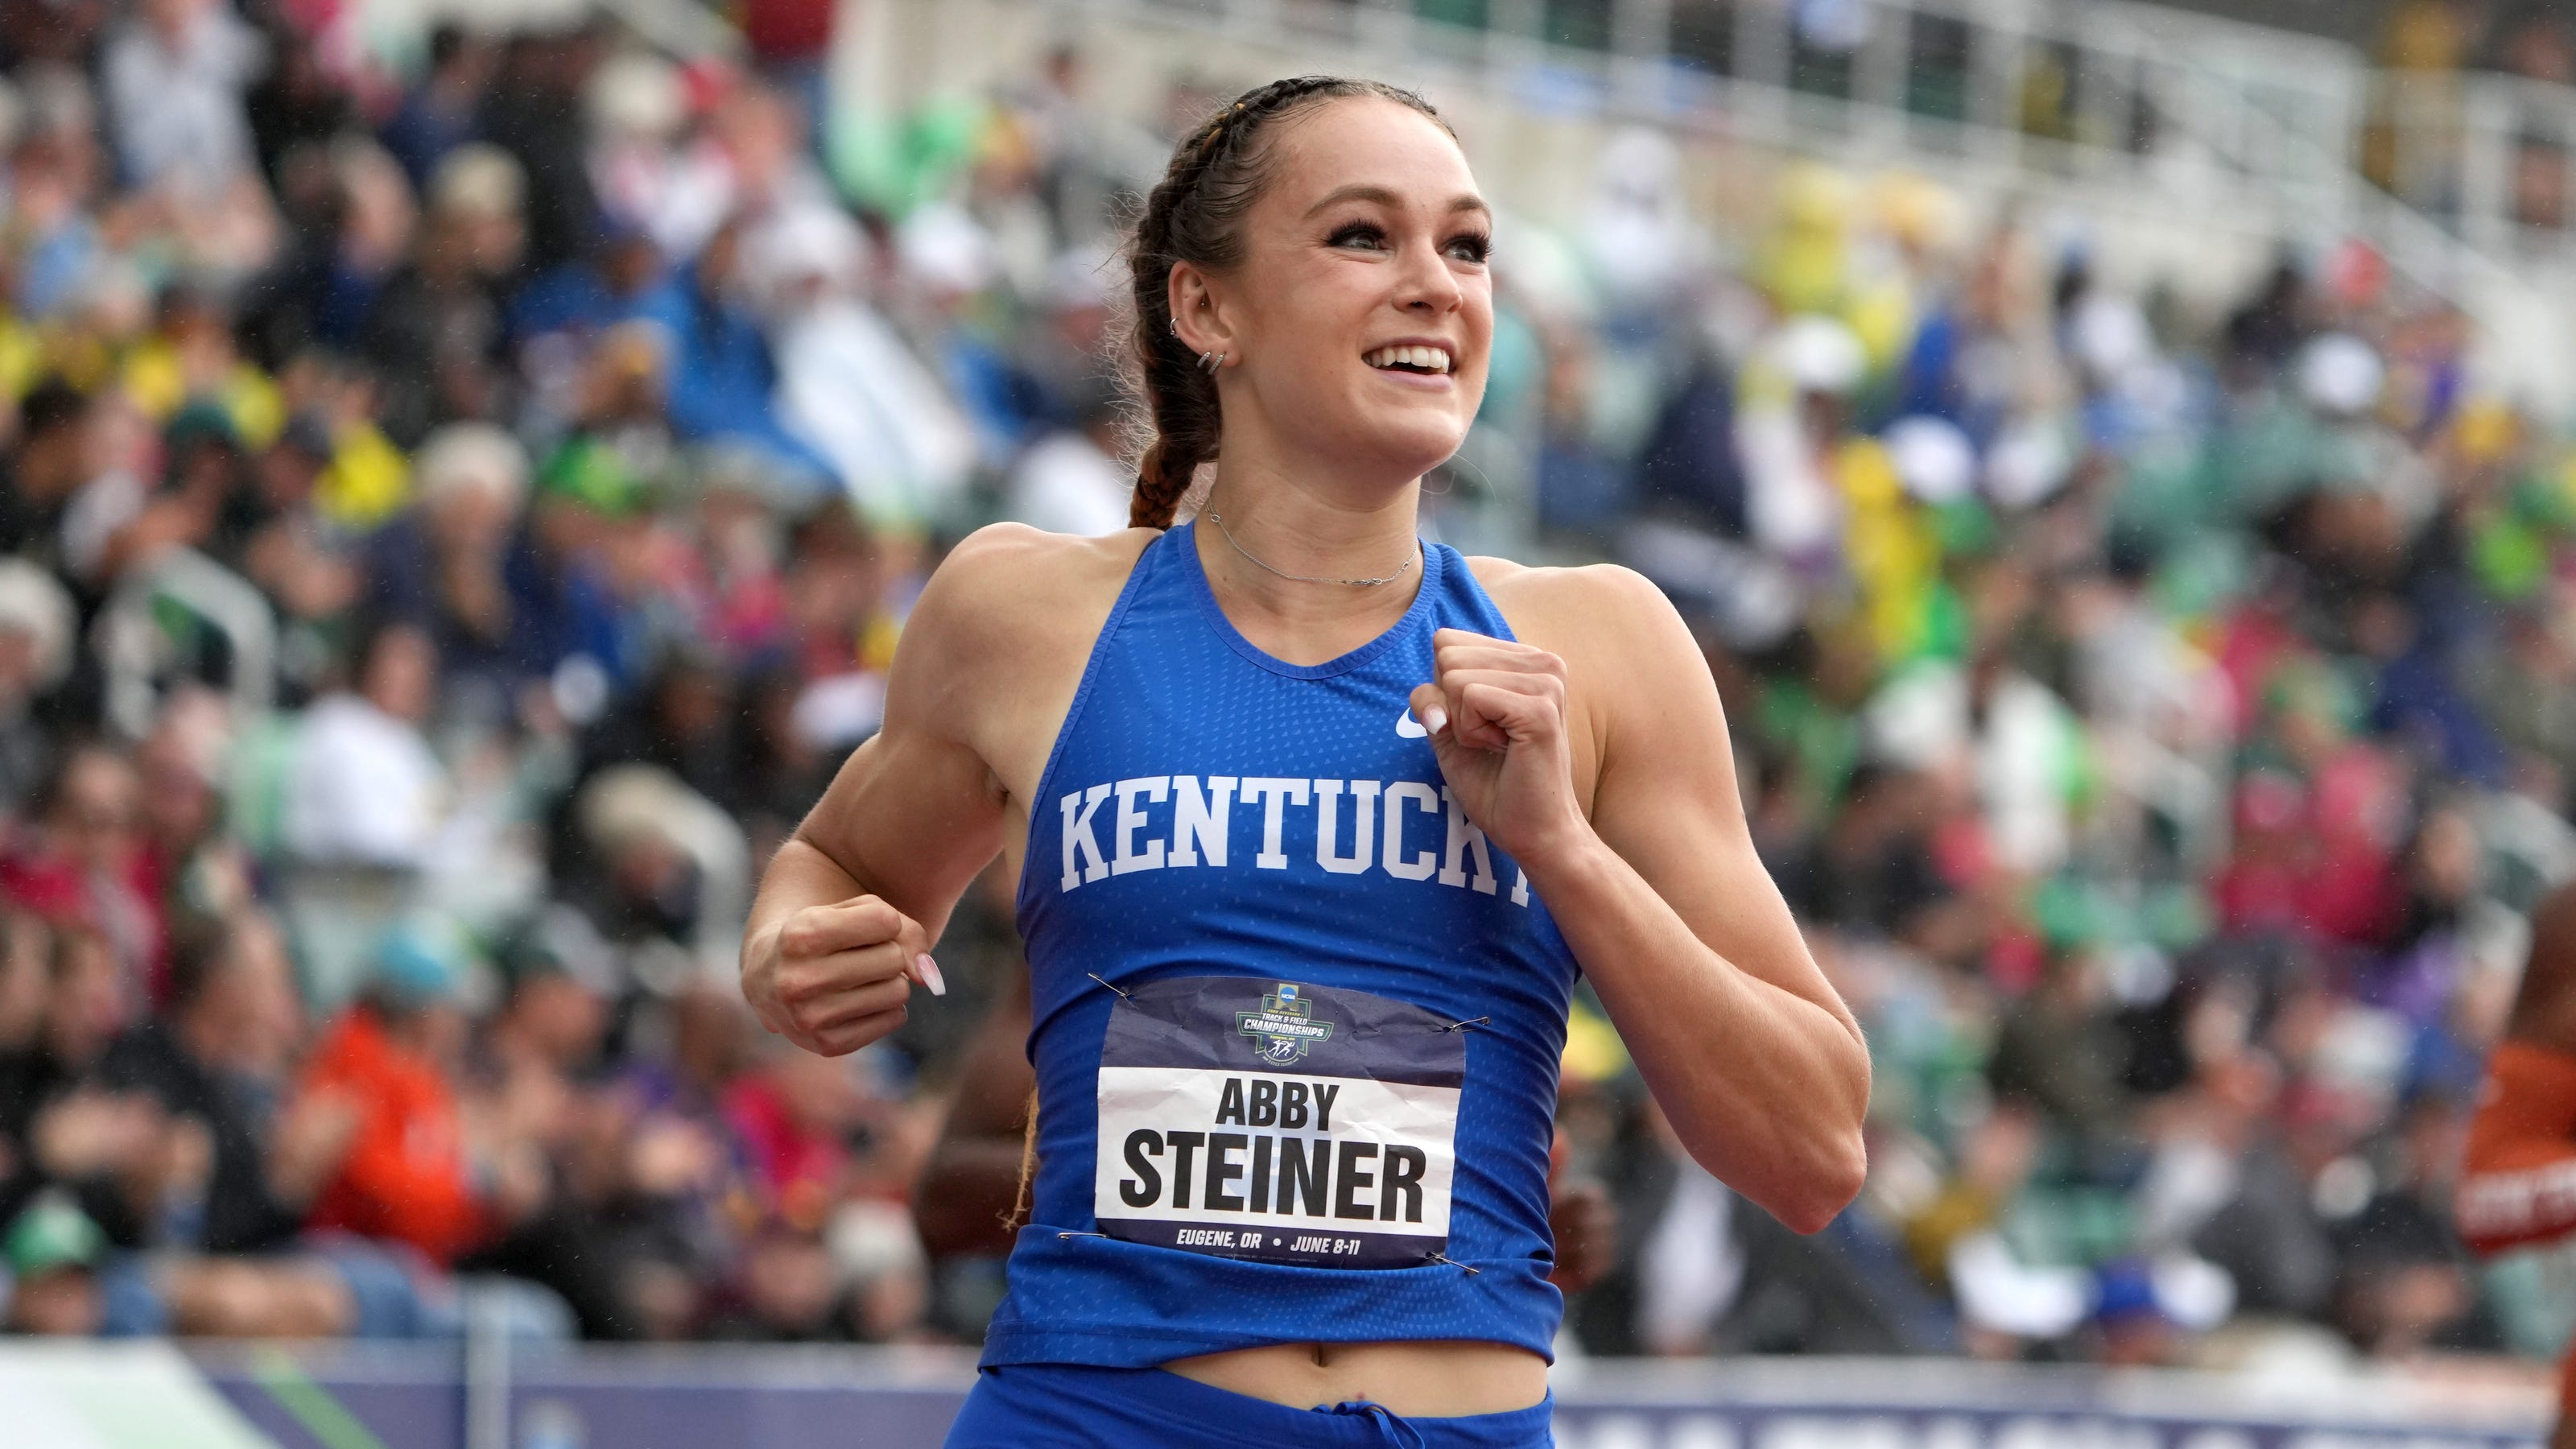 Abby Steiner Kentucky track star overcame injury before 200m title